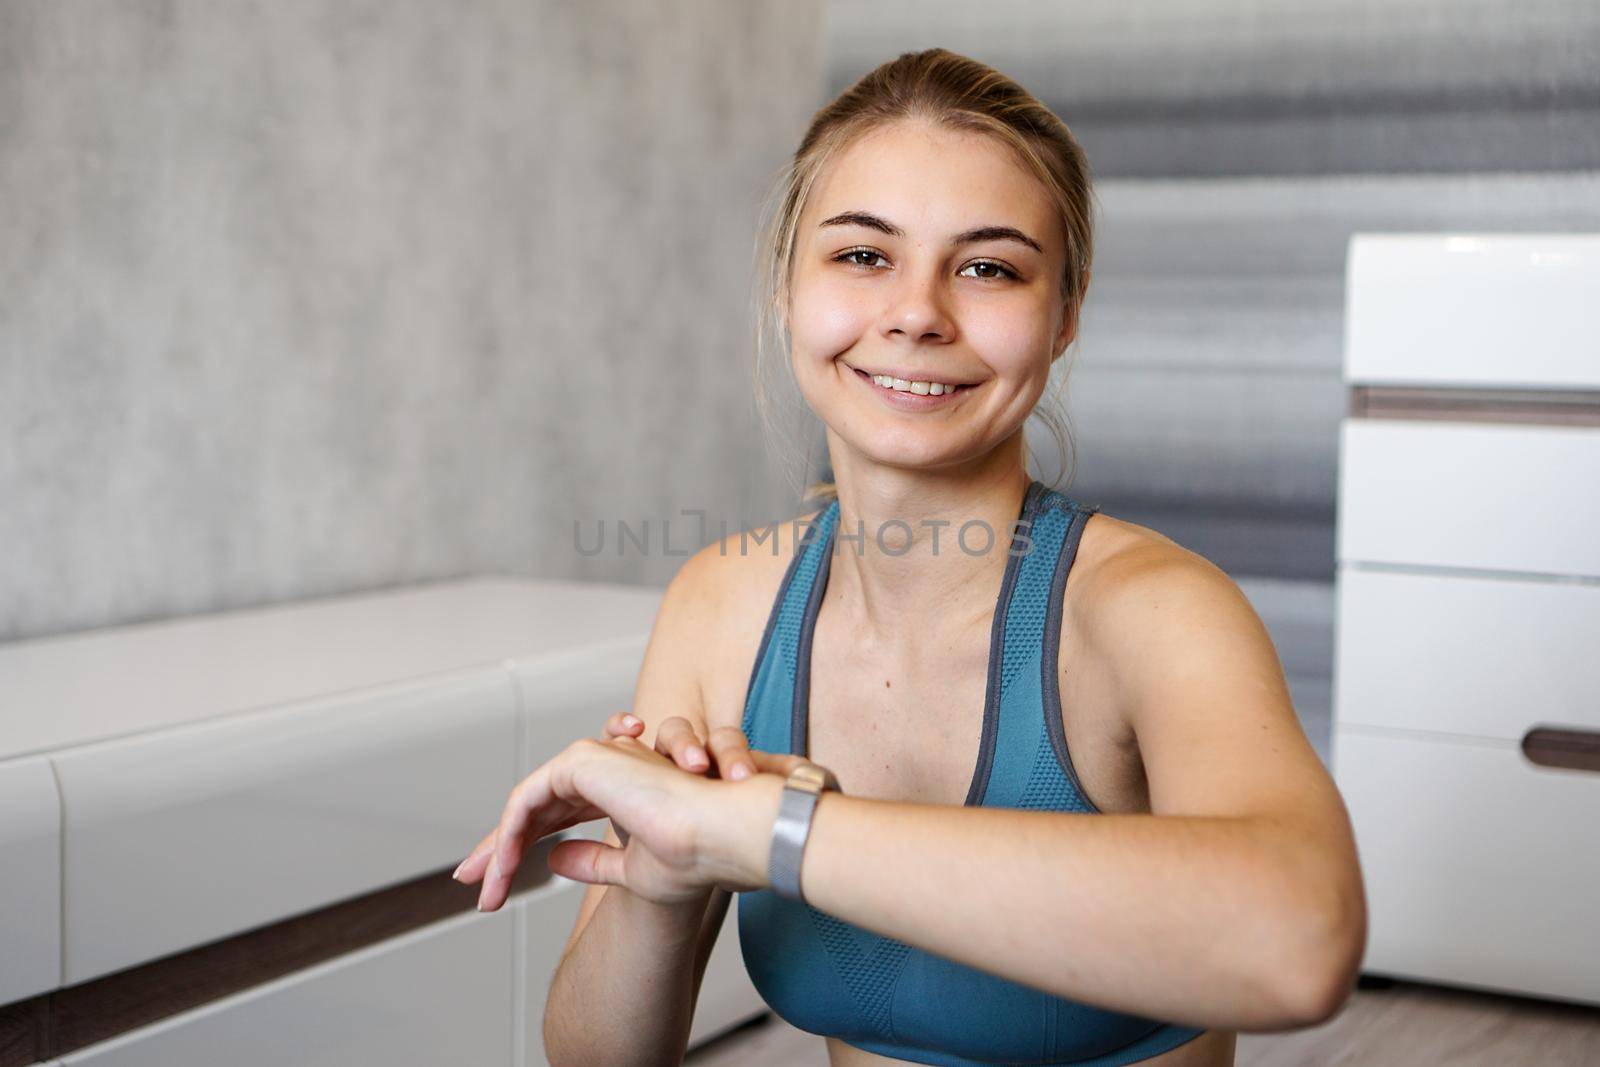 Portrait of young woman checking digital fitness tracker during self-training at home. She looks at the camera and smiles